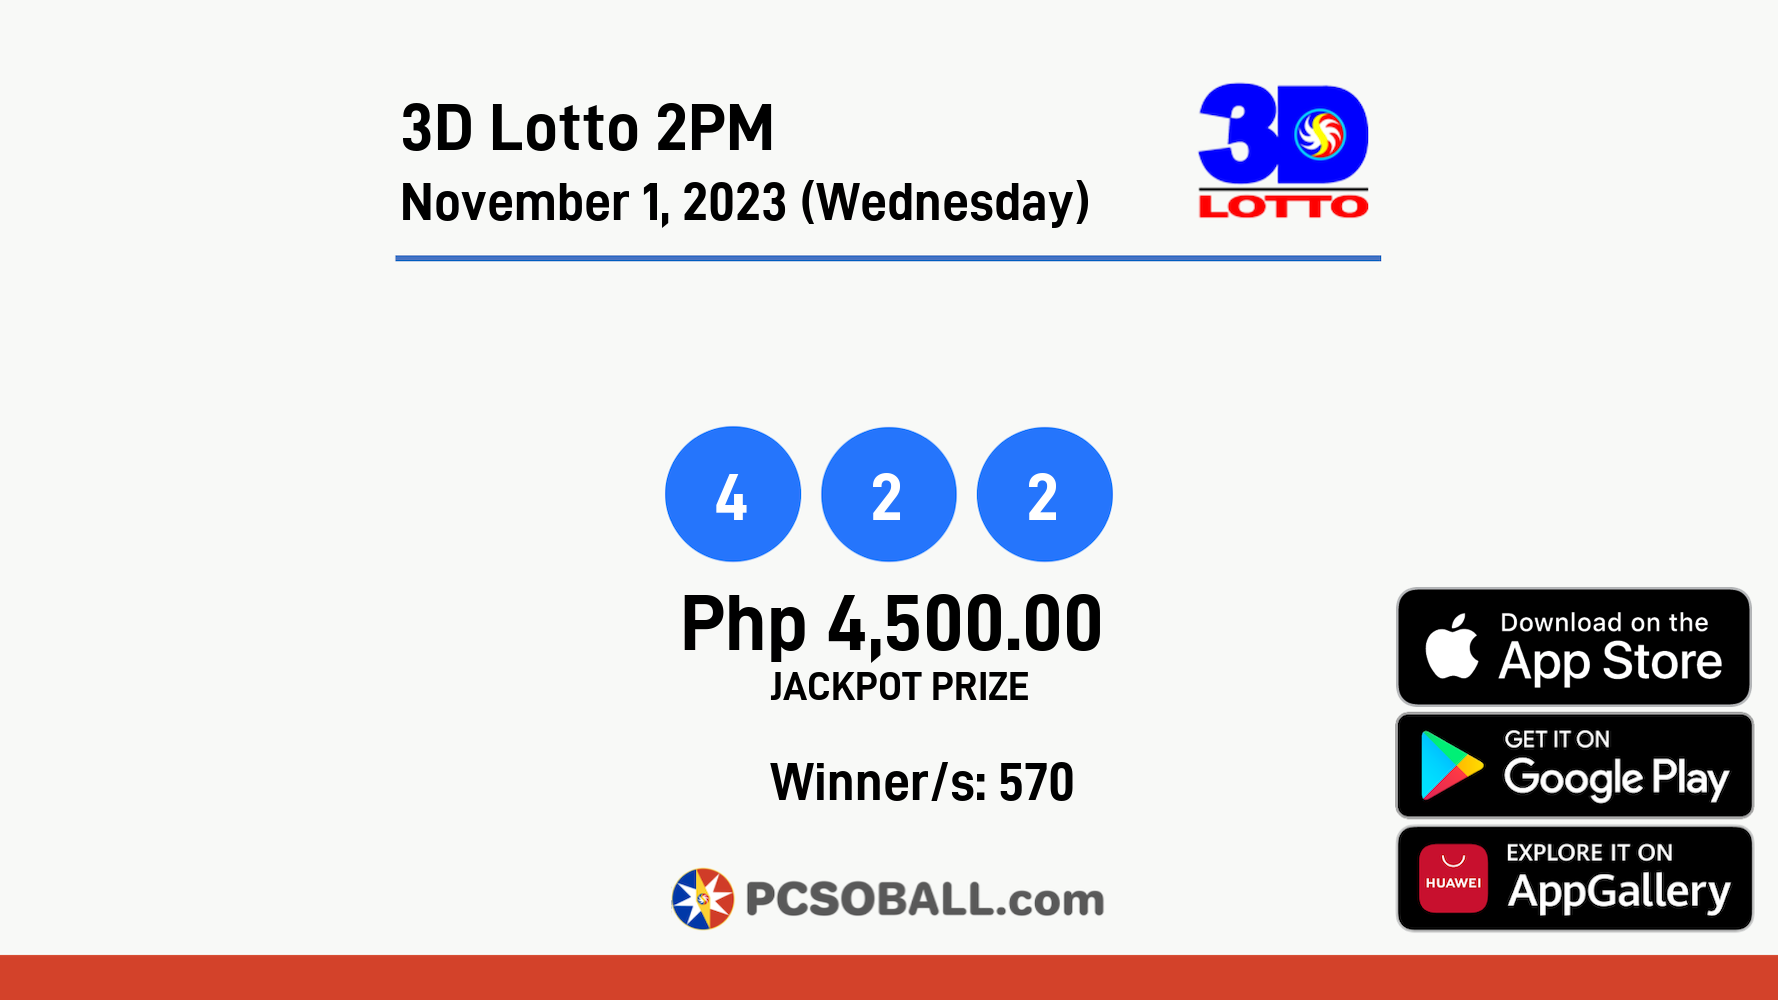 3D Lotto 2PM November 1, 2023 (Wednesday) Result